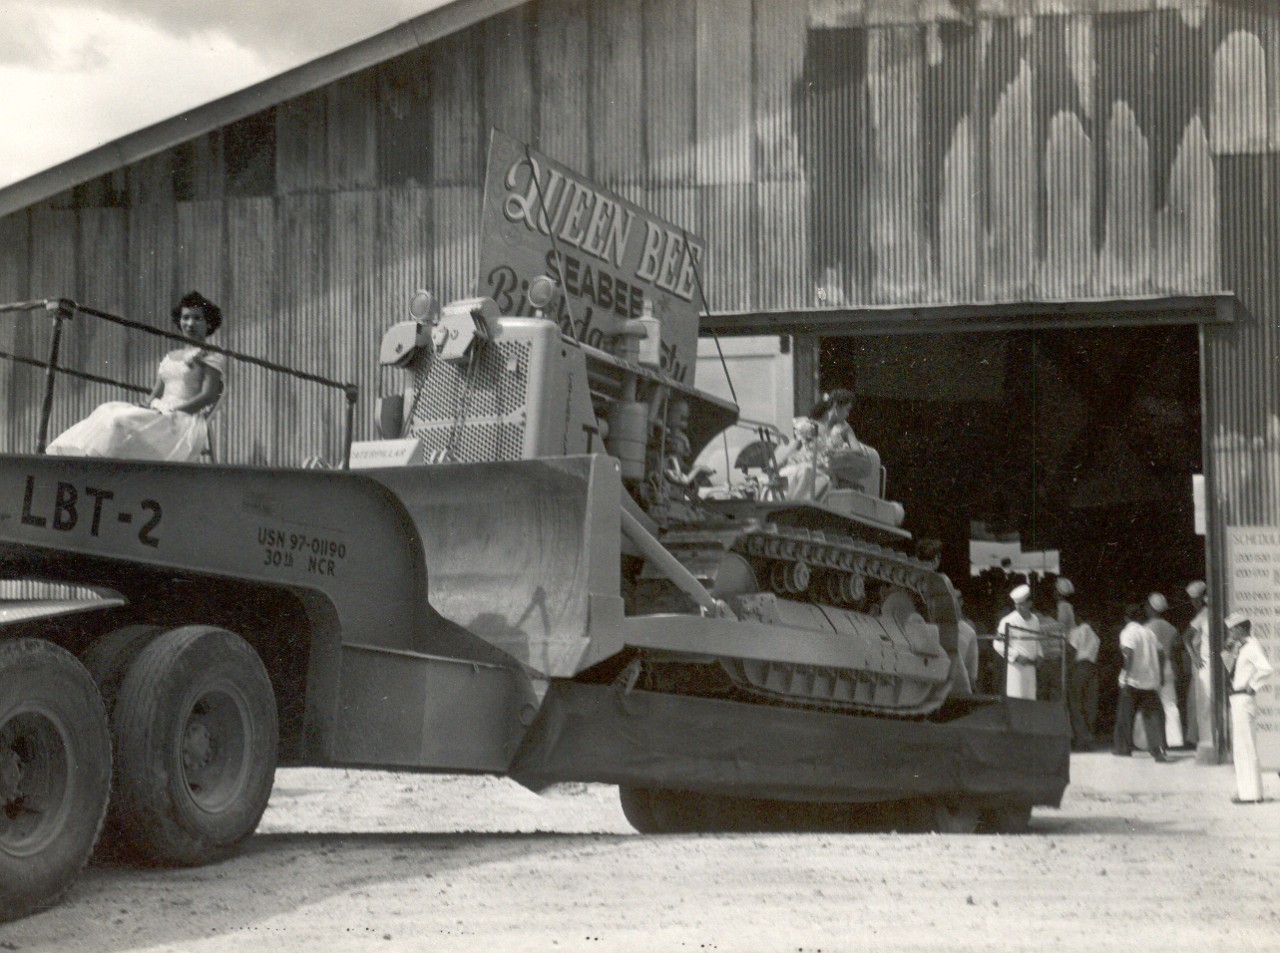 <p>Seabee Queen at Cubi Point 1952</p>
